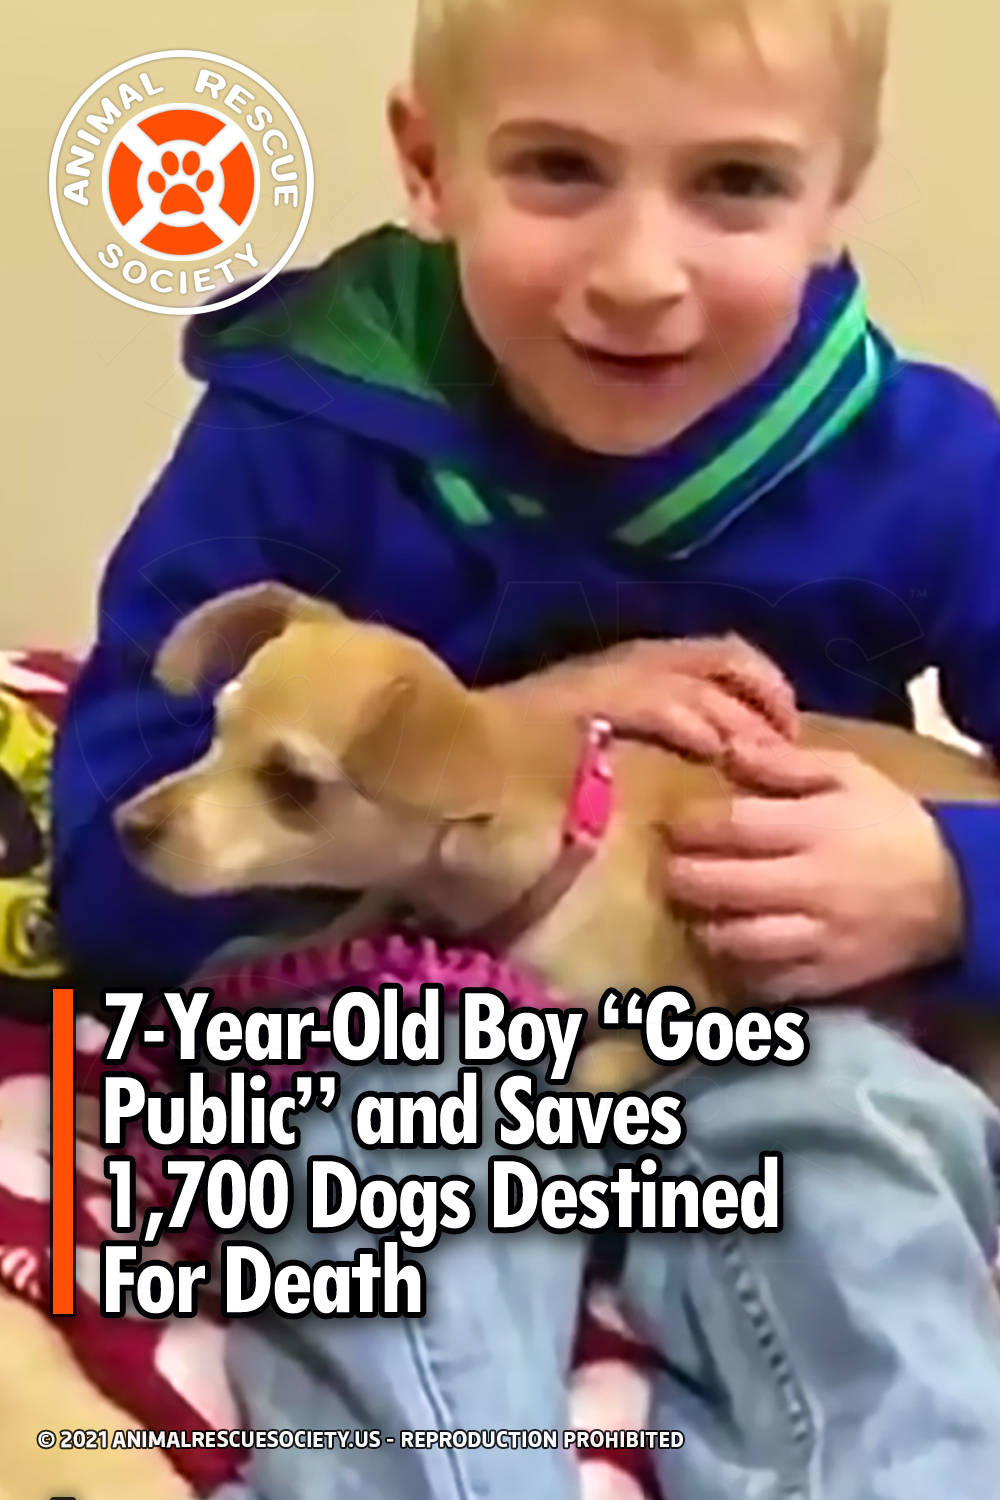 7-Year-Old Boy “Goes Public” and Saves 1,700 Dogs Destined For Death